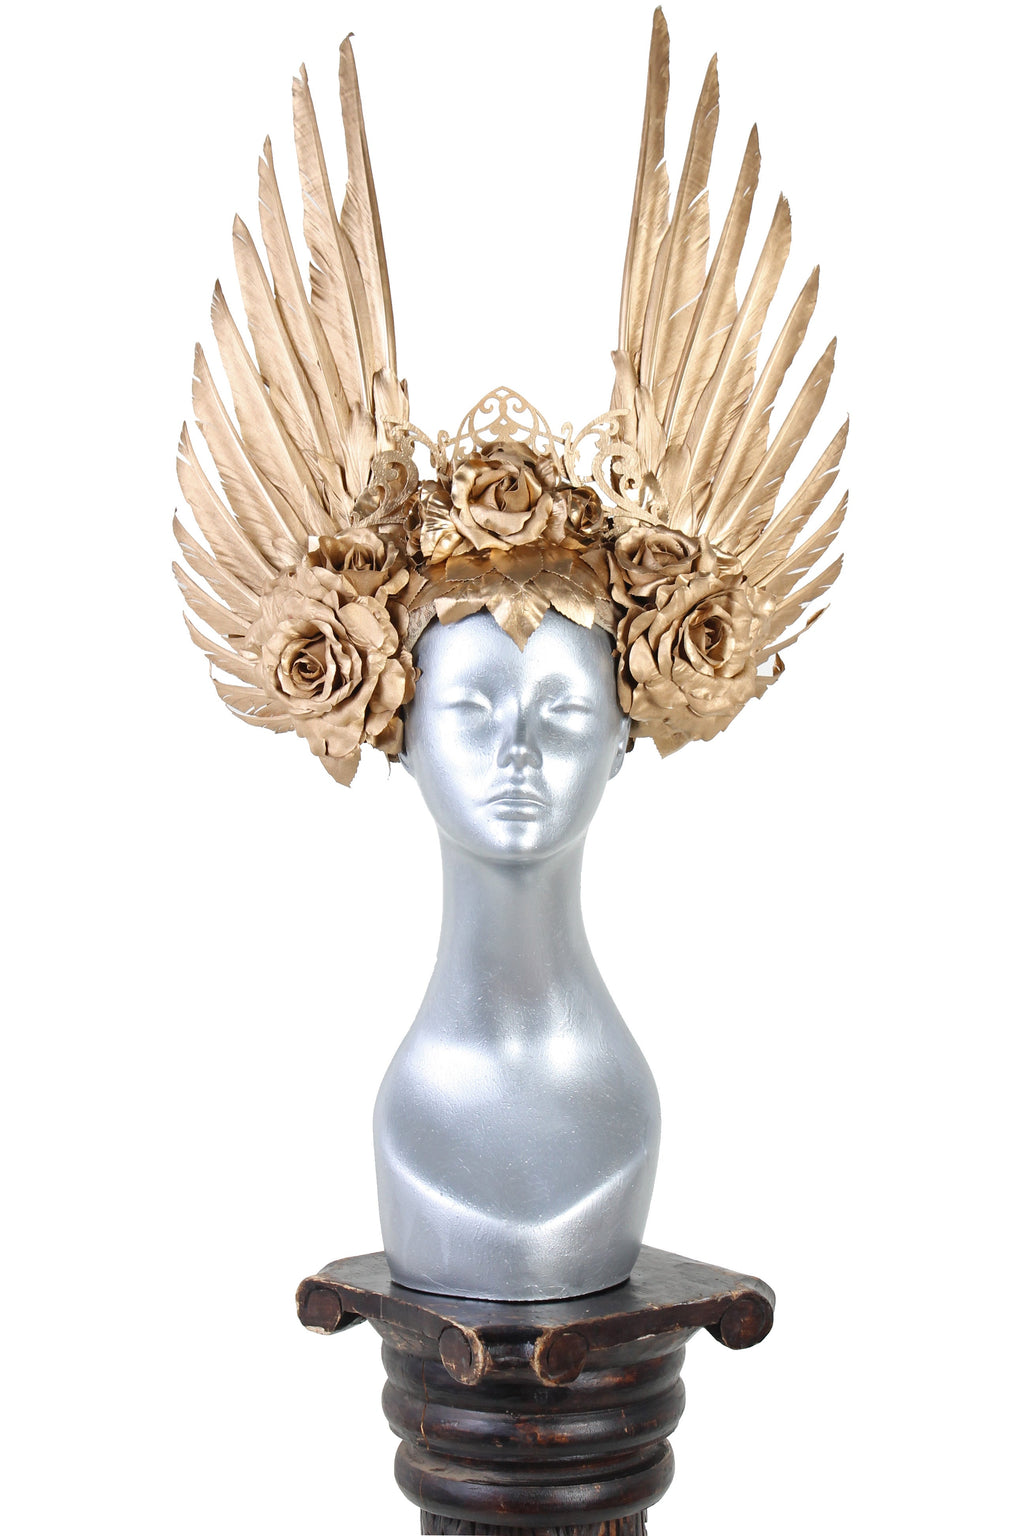 Rose Gold Wings & Roses Headdress - Serpentfeathers